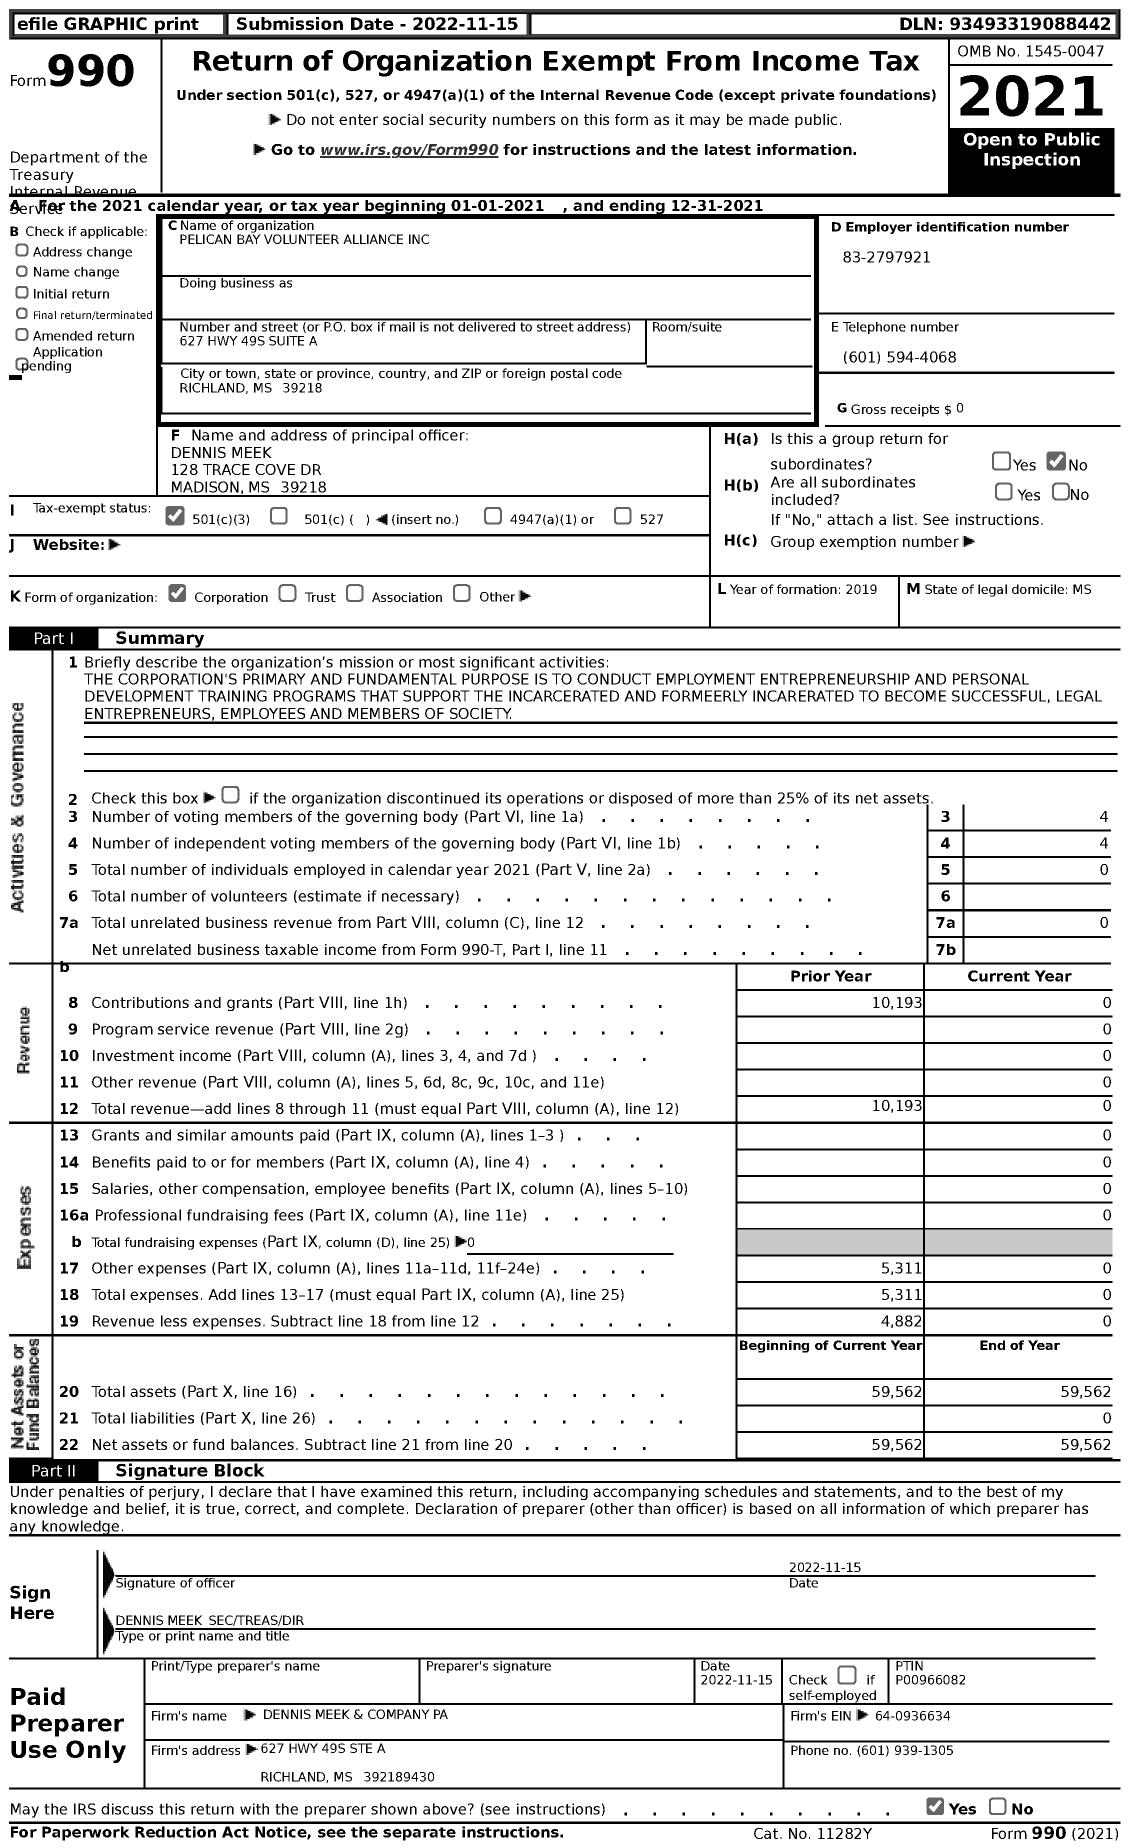 Image of first page of 2021 Form 990 for Pelican Bay Volunteer Alliance